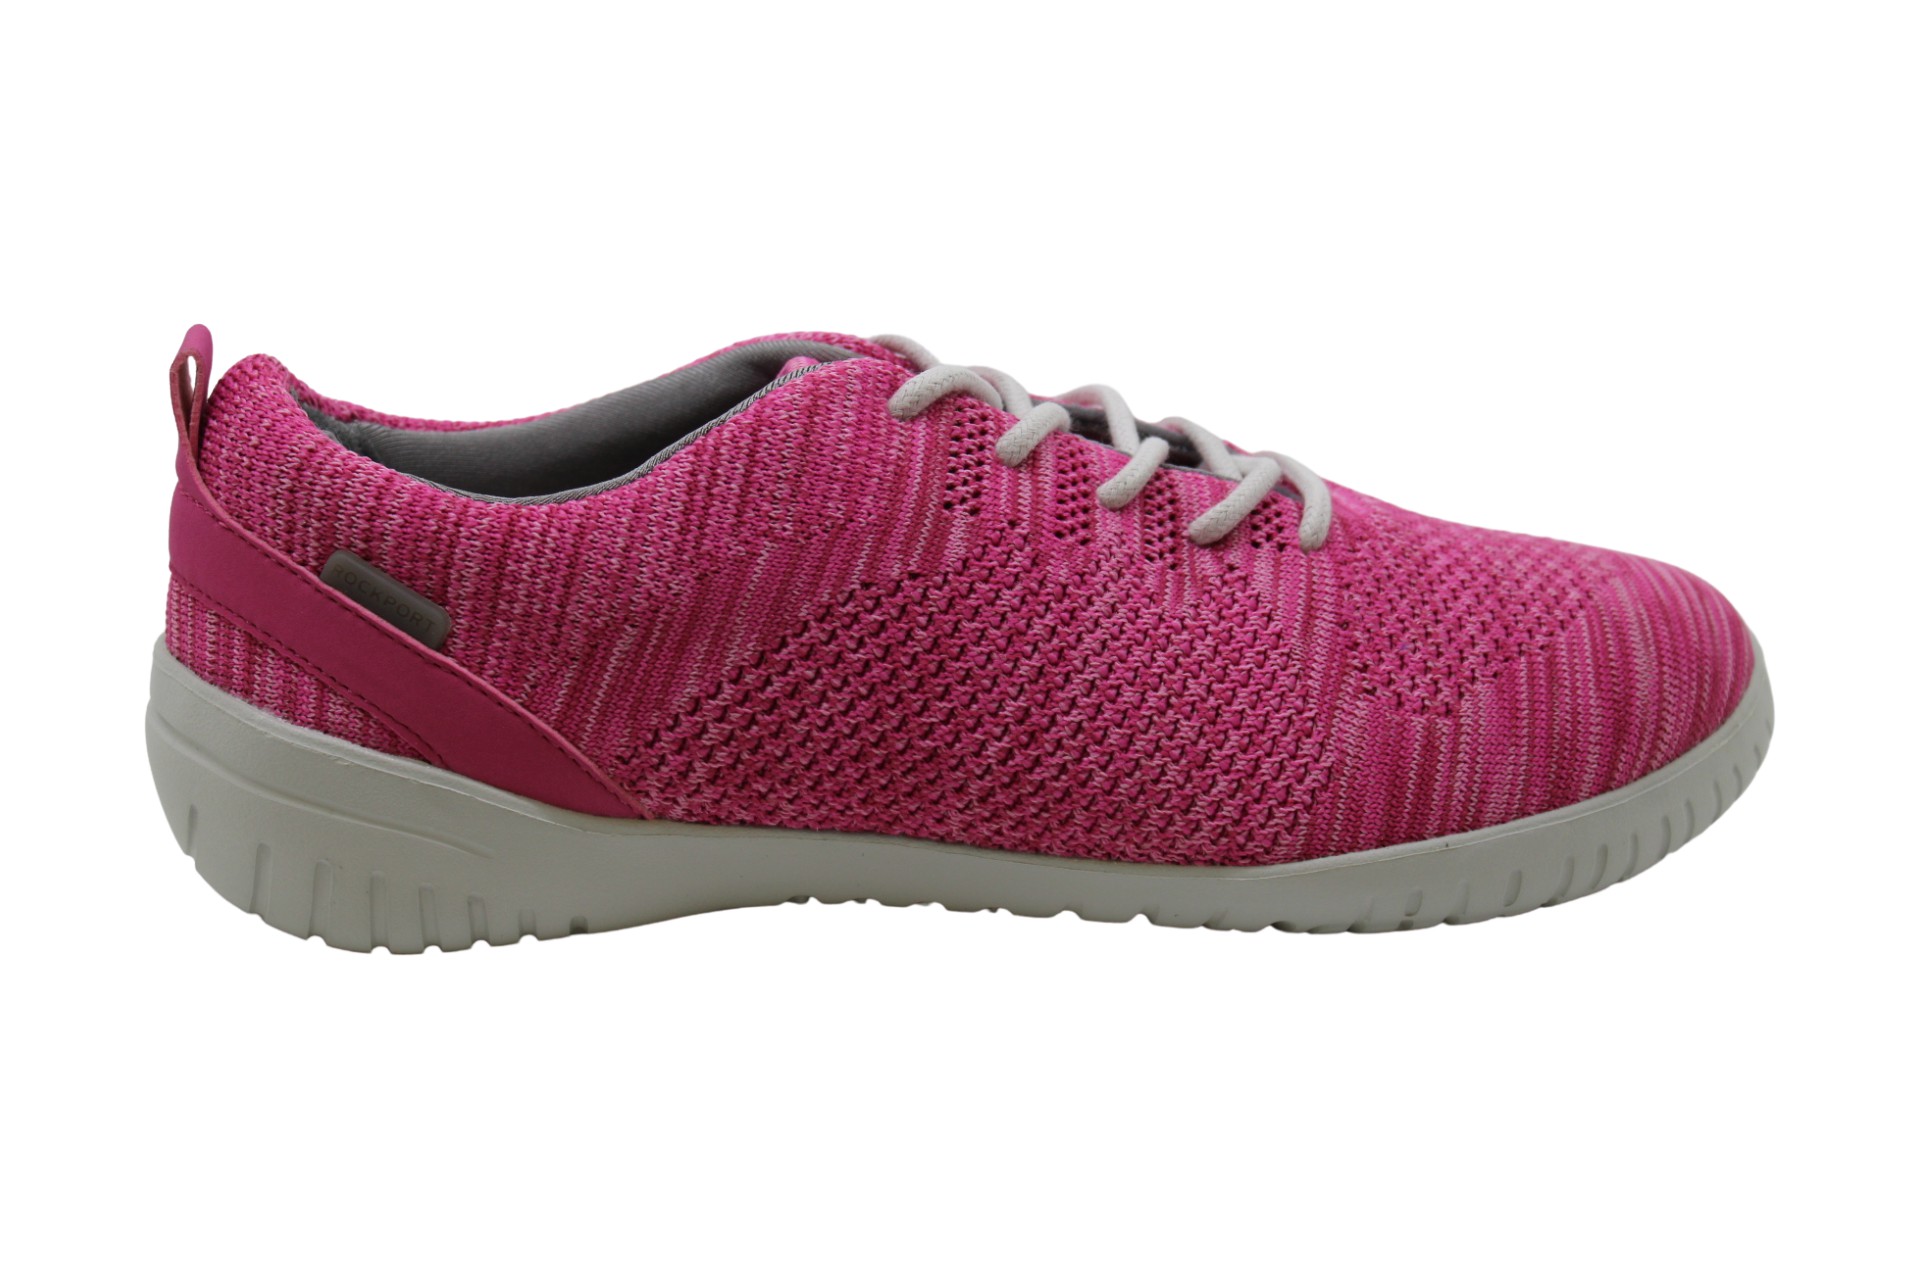 Rockport Women's Shoes Raelyn Knit Tie Low Top Lace Up Fashion, Pink ...